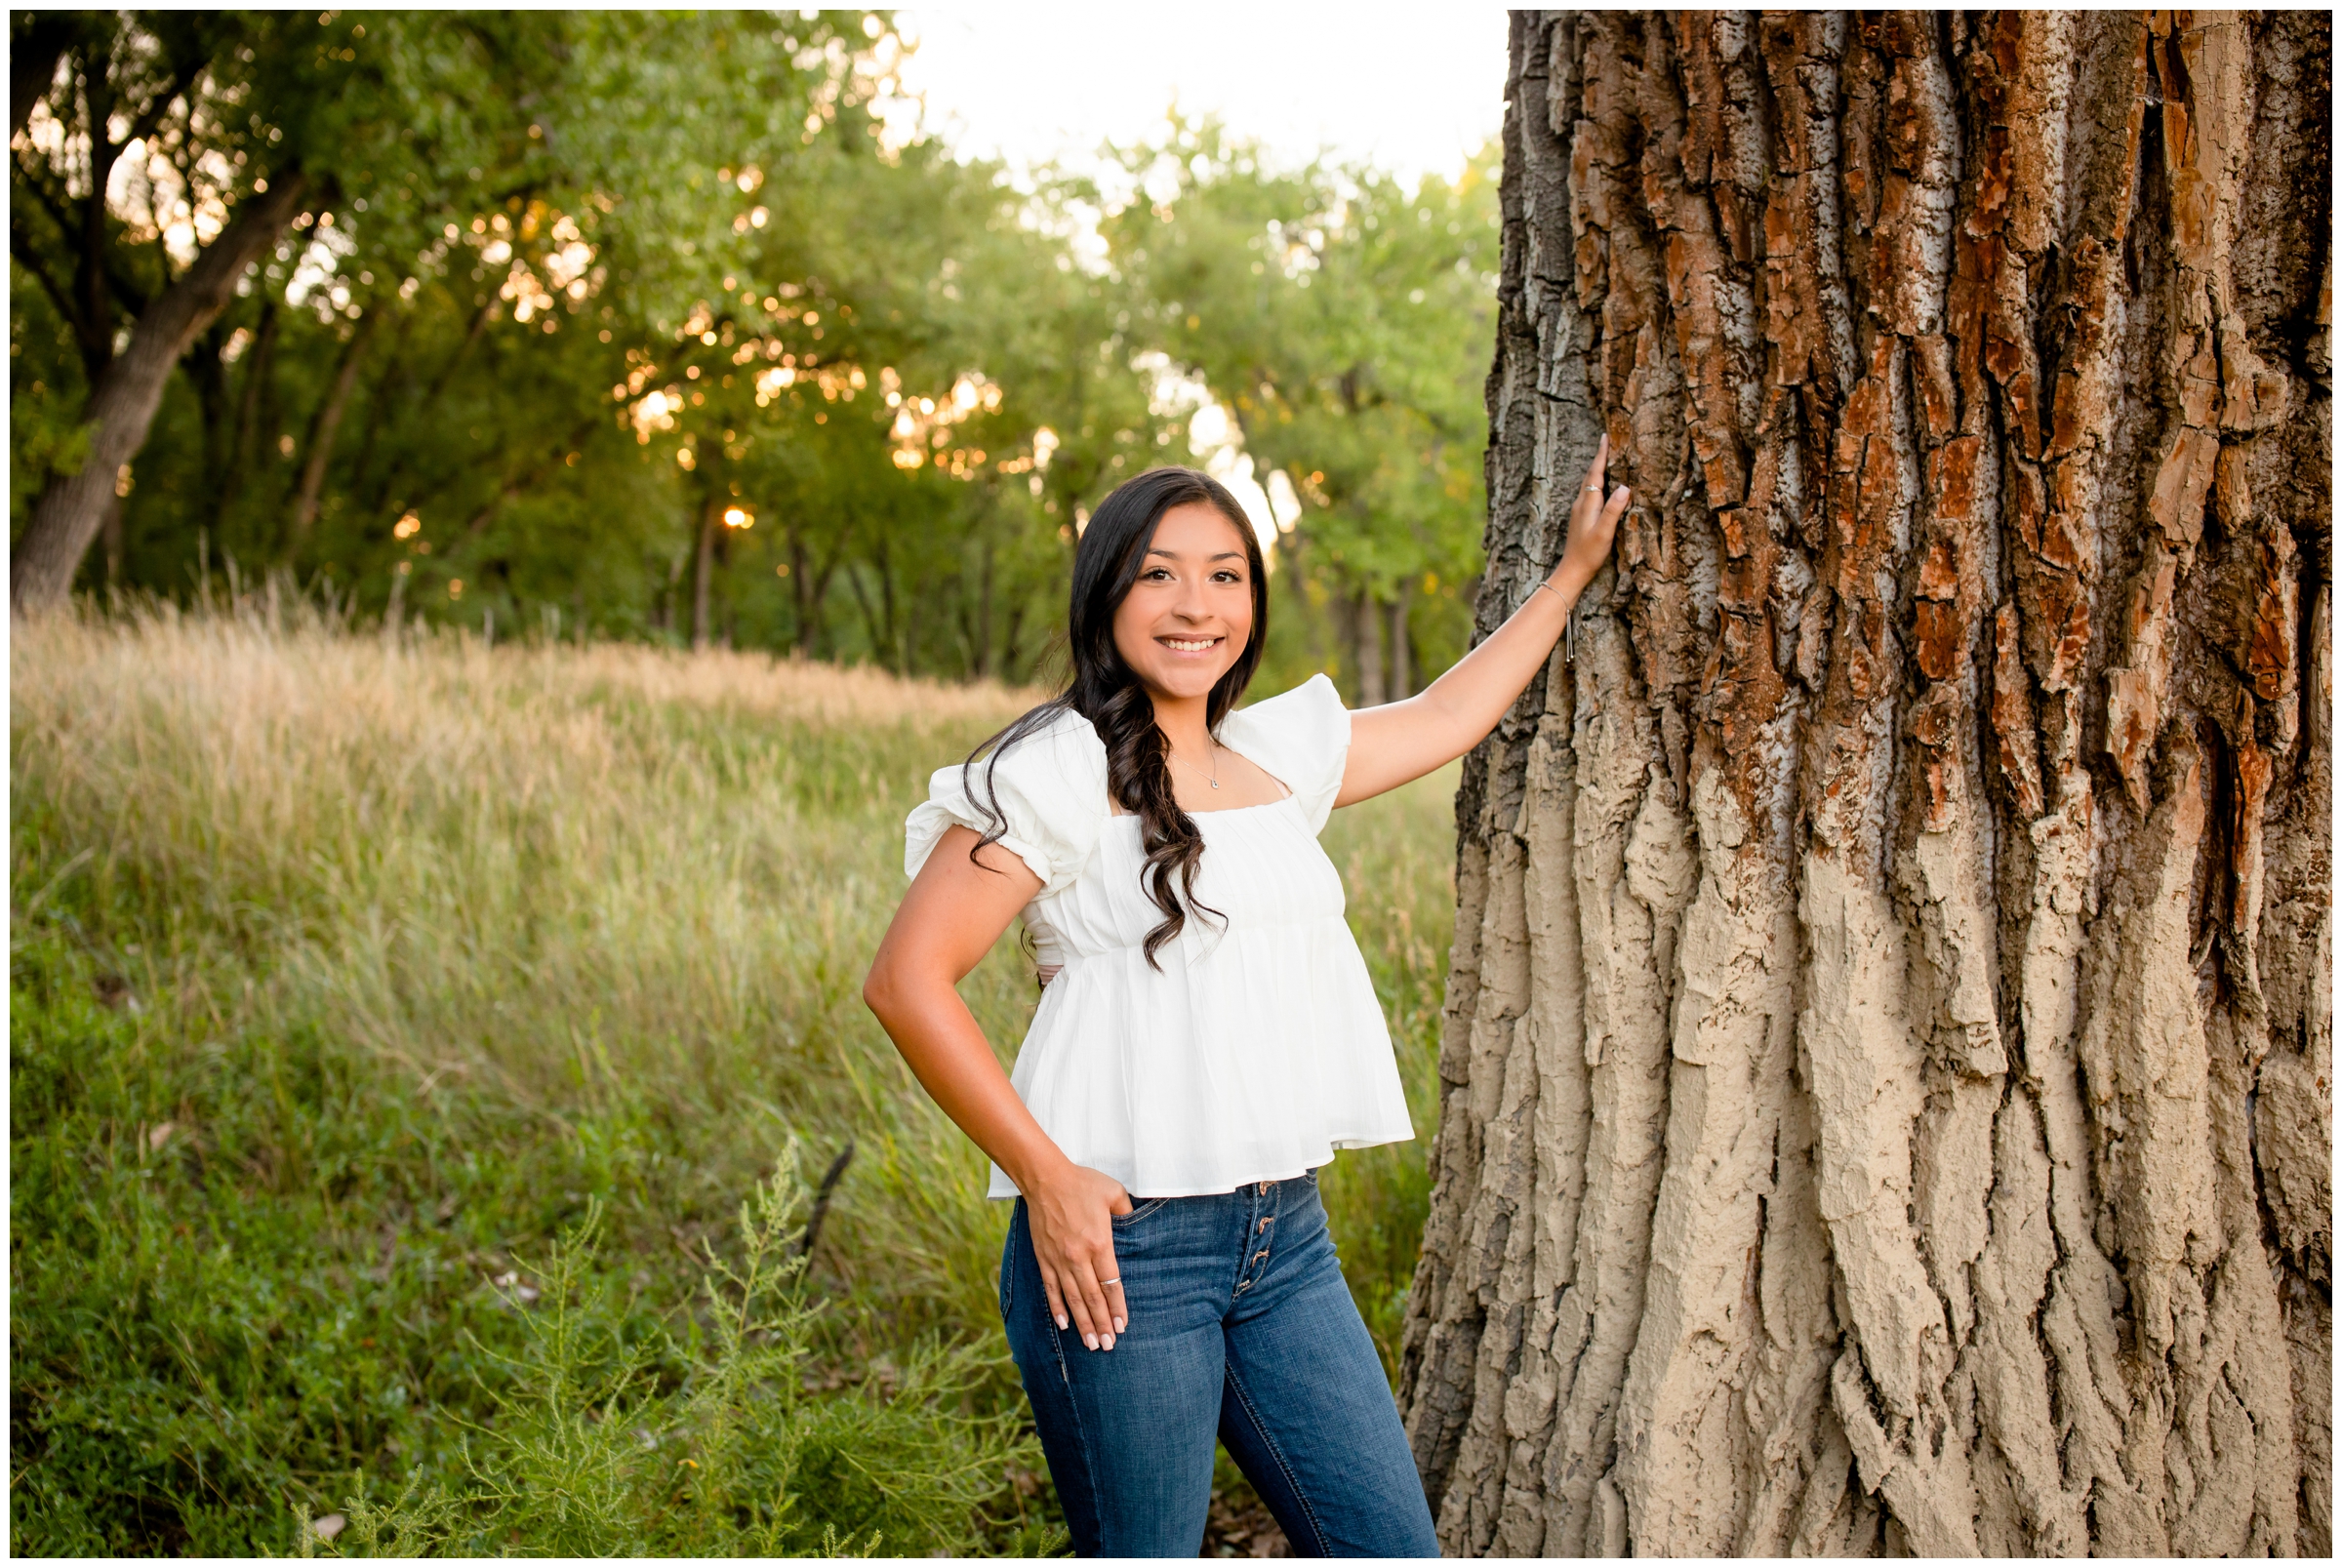 high school graduation photography session at Golden Ponds Nature Area in Colorado 